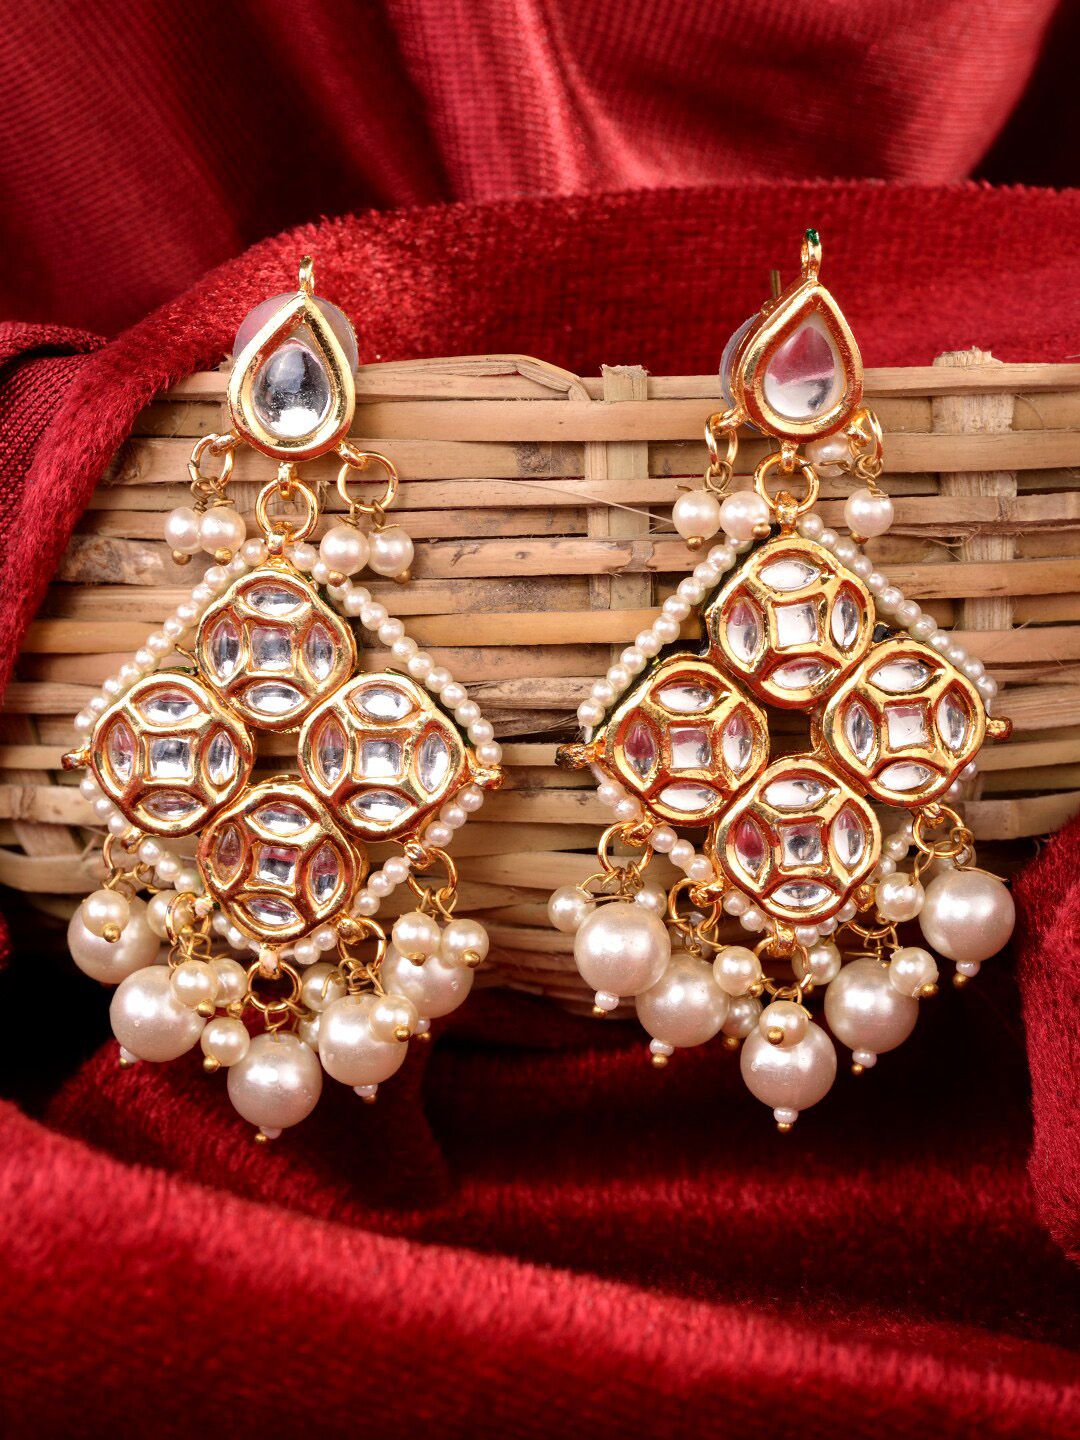 Saraf RS Jewellery Gold Plated Kundan Studded & Pearl Beaded Handcrafted Drop Earrings Price in India